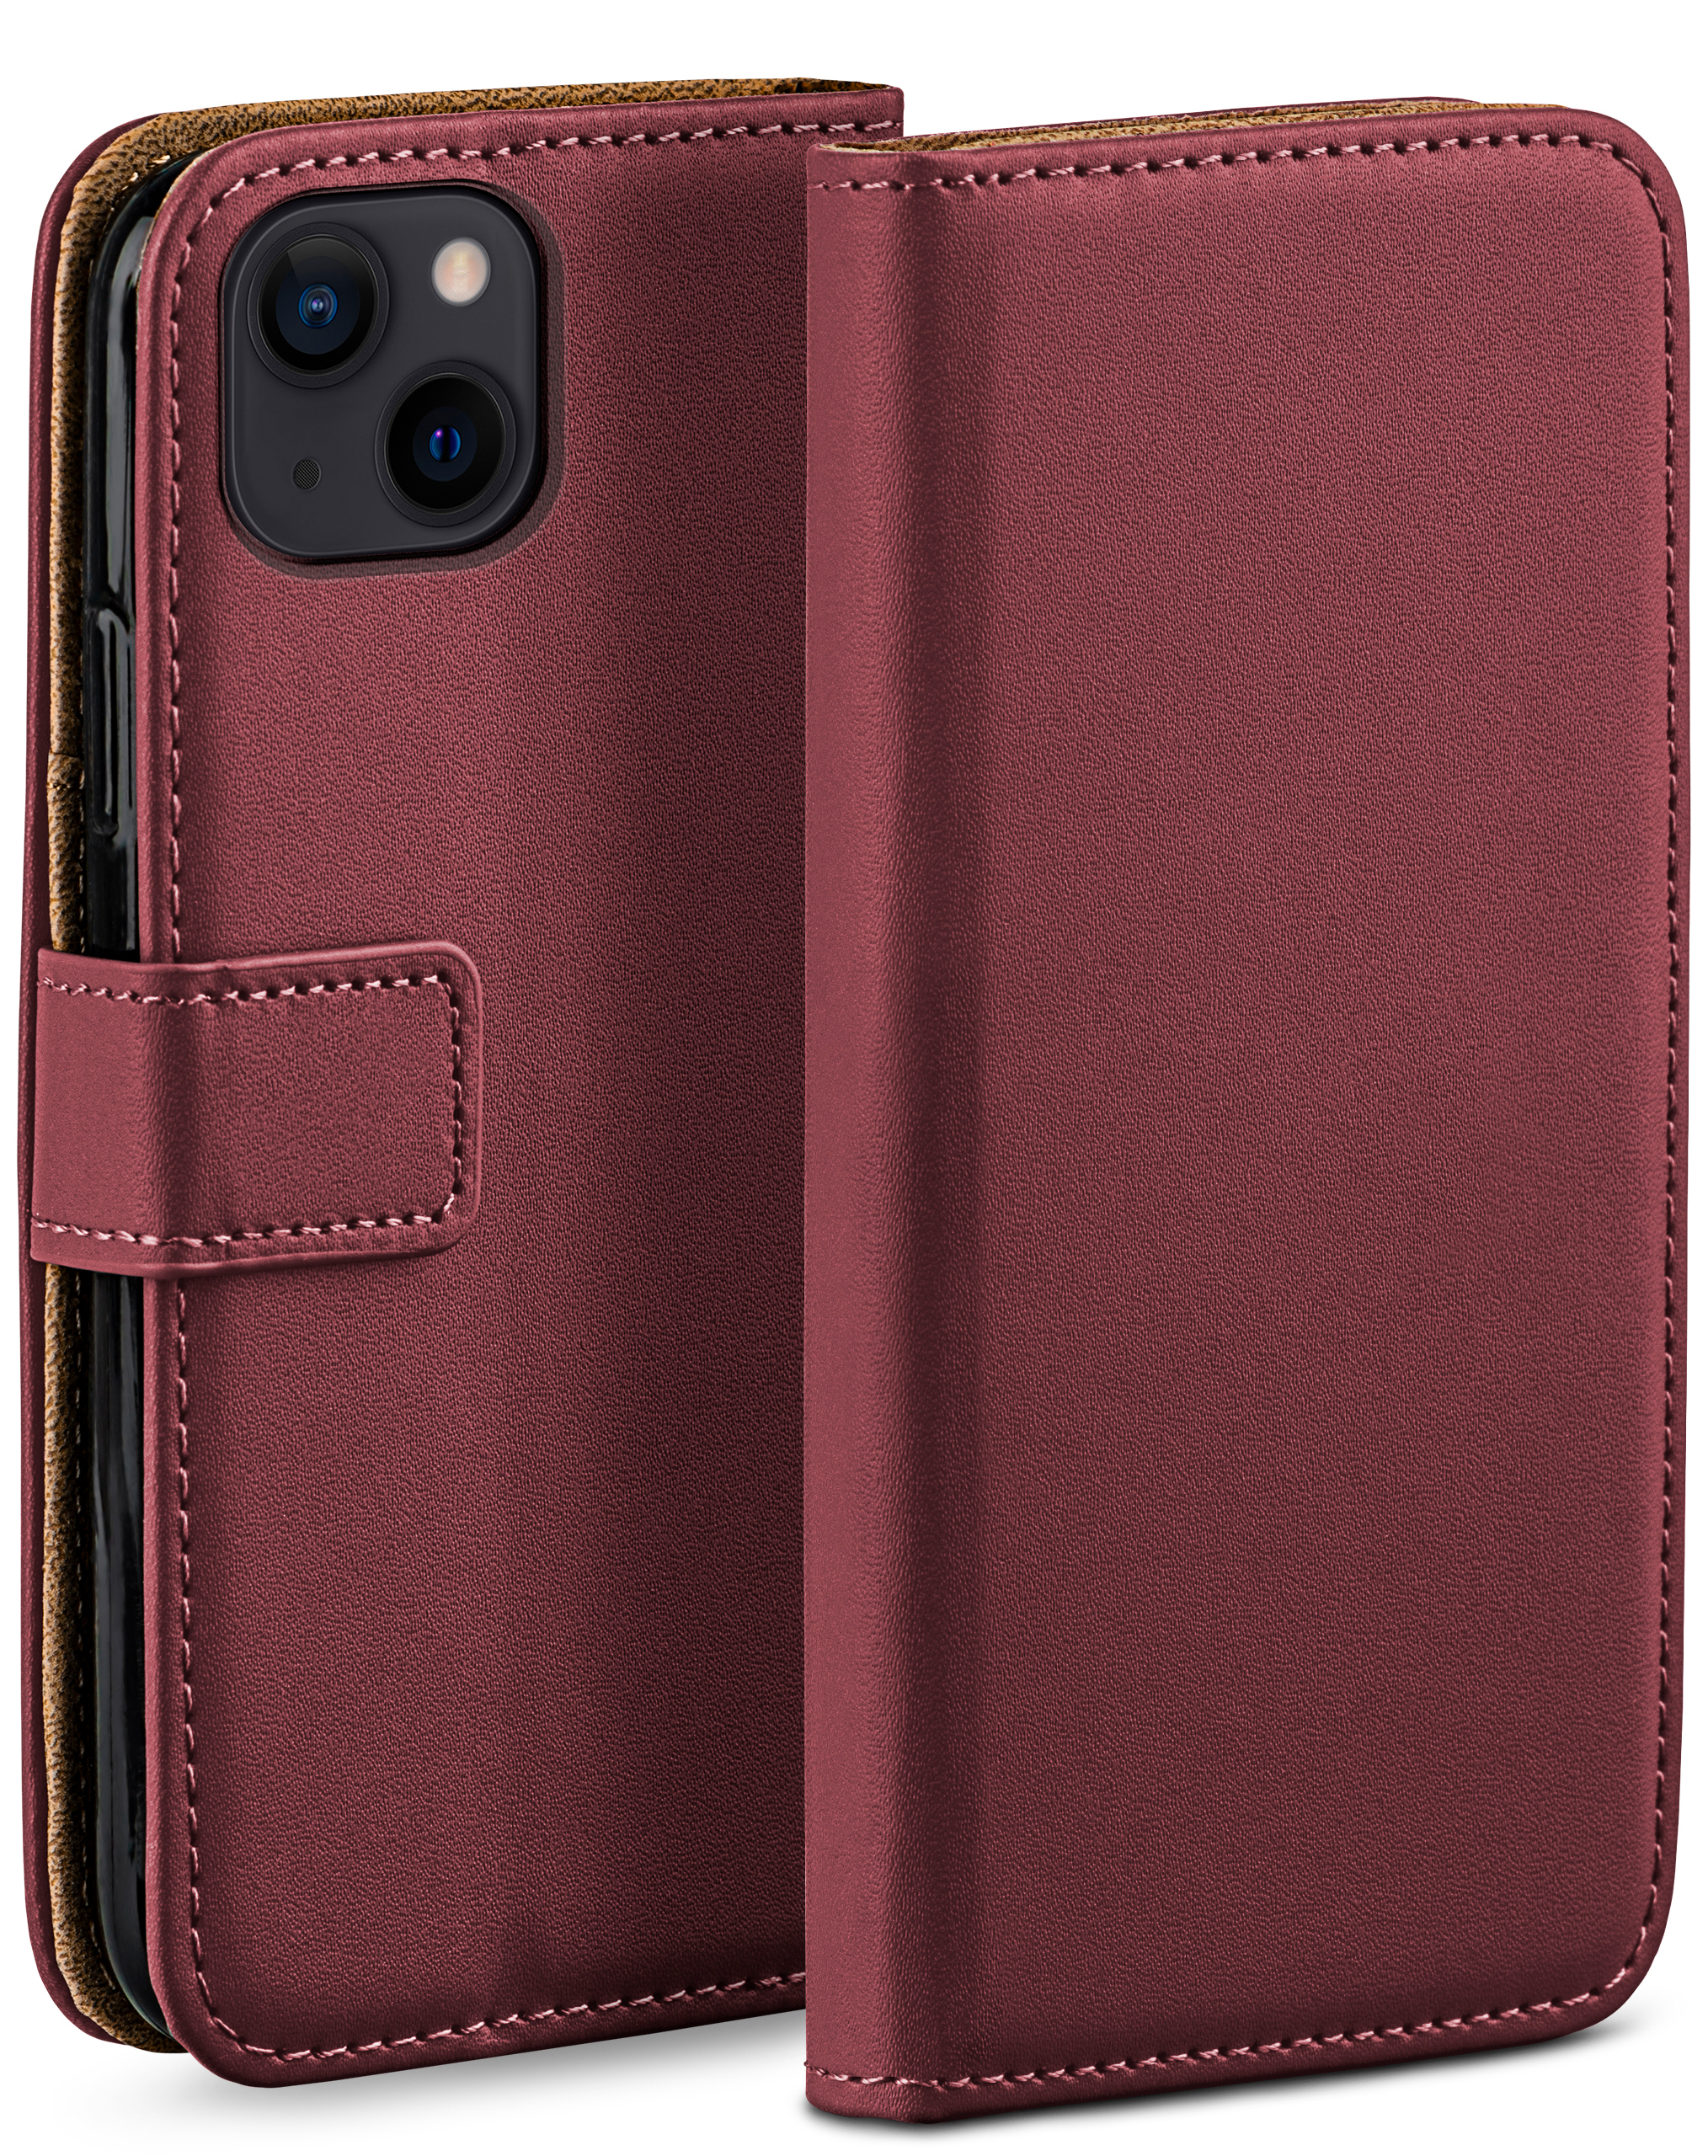 Apple, iPhone Book MOEX Case, Bookcover, 14, Maroon-Red